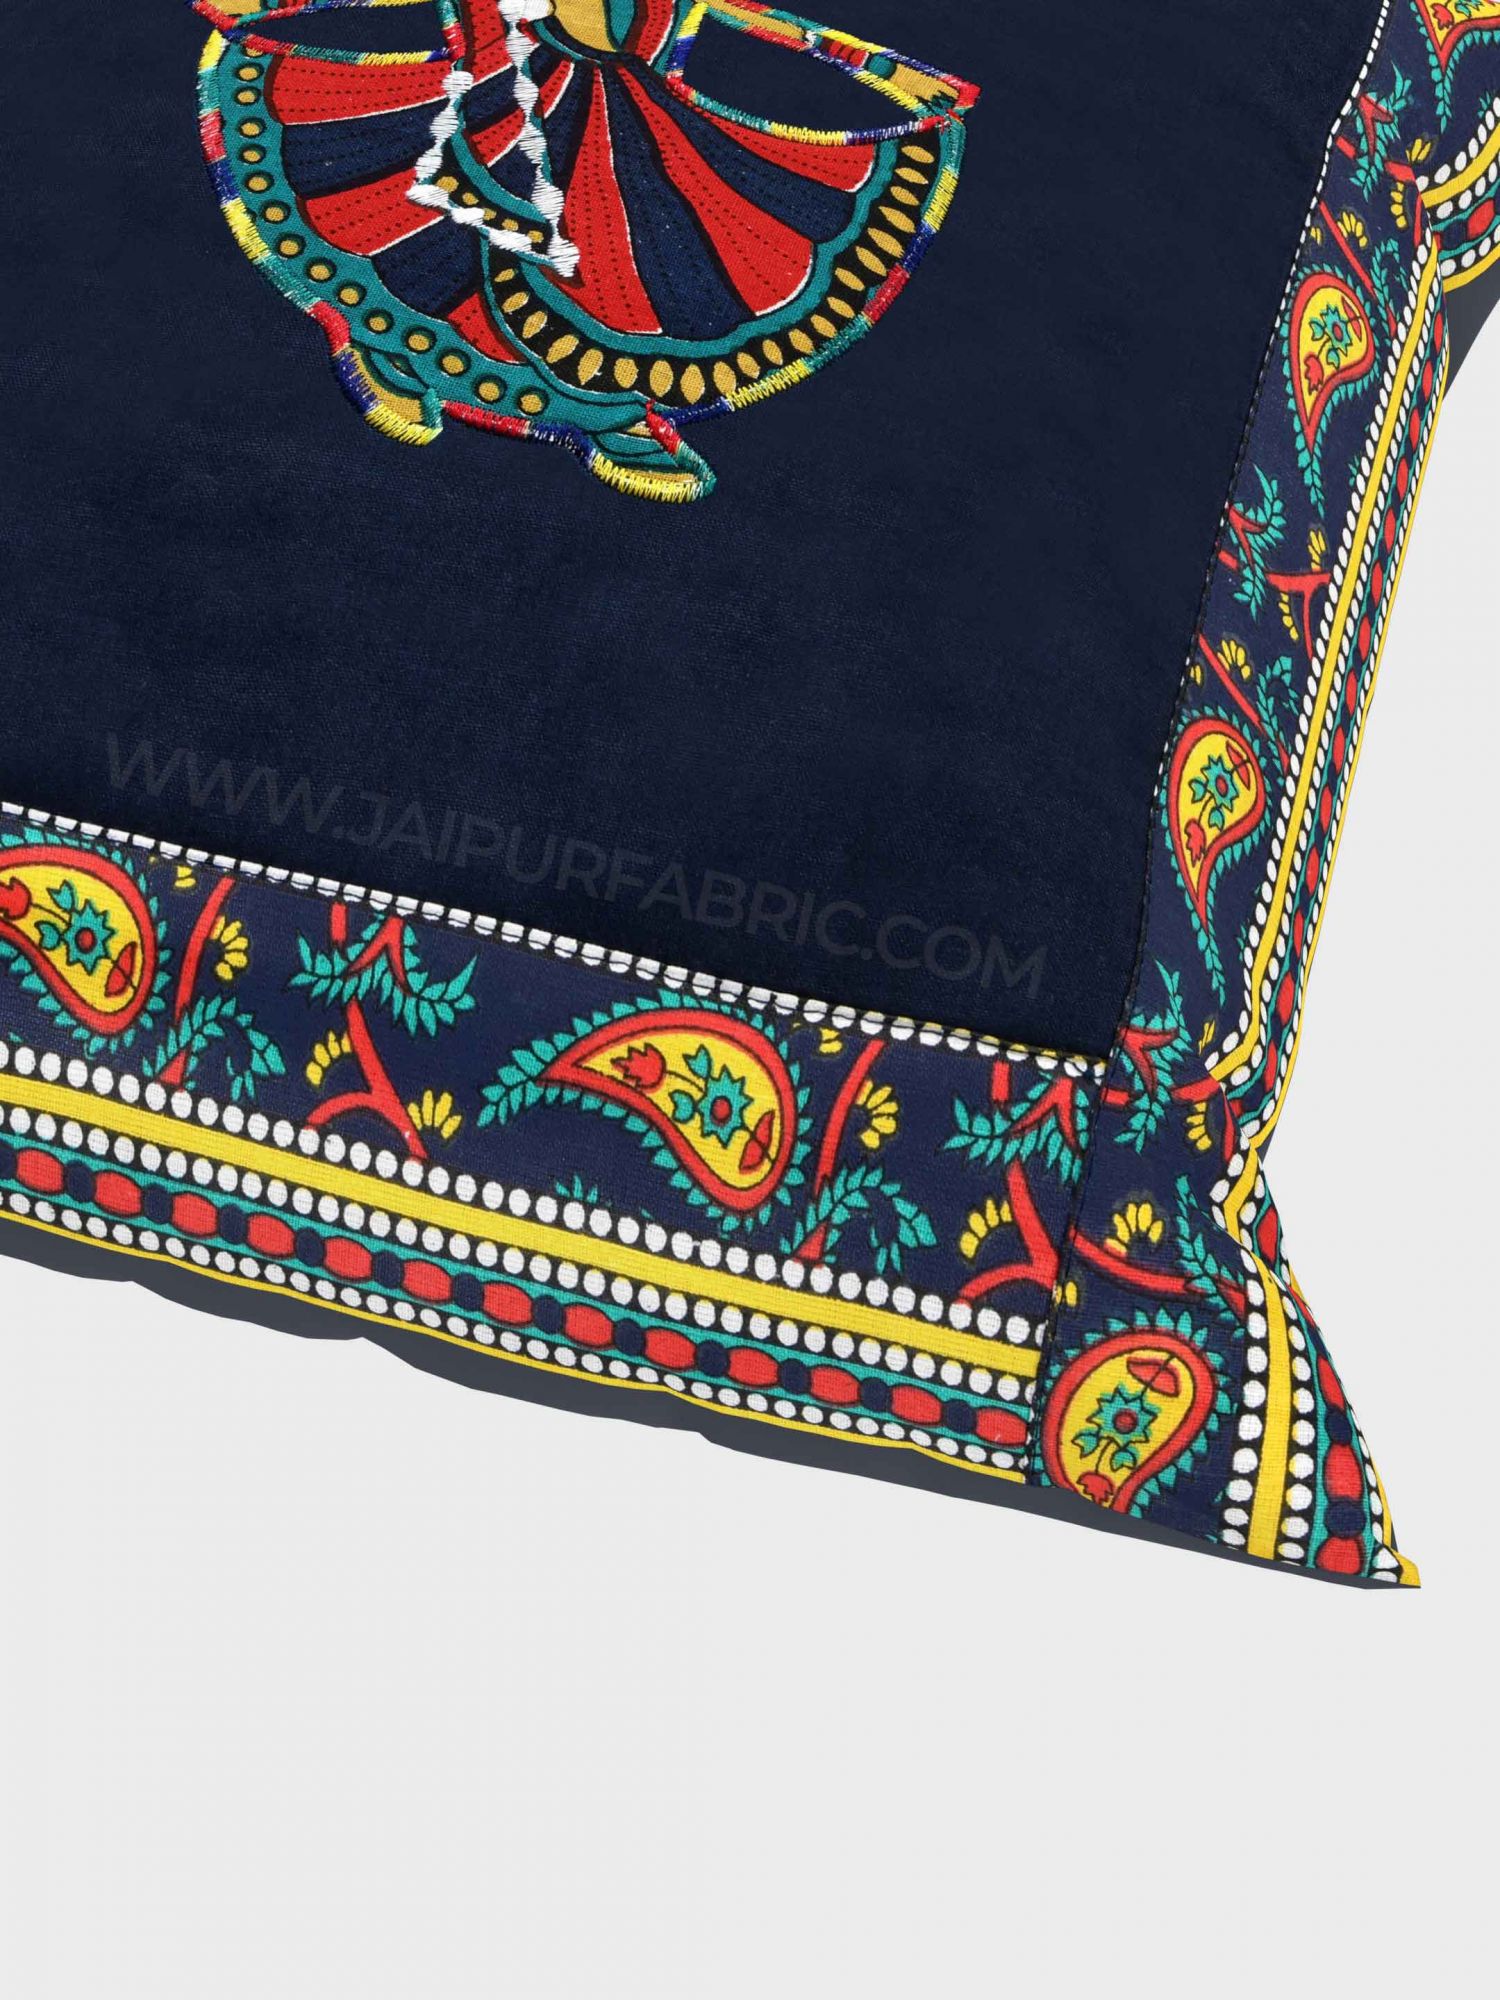 Applique Blue Gujri Jaipuri Hand Made Embroidery Patch Work Cushion Cover